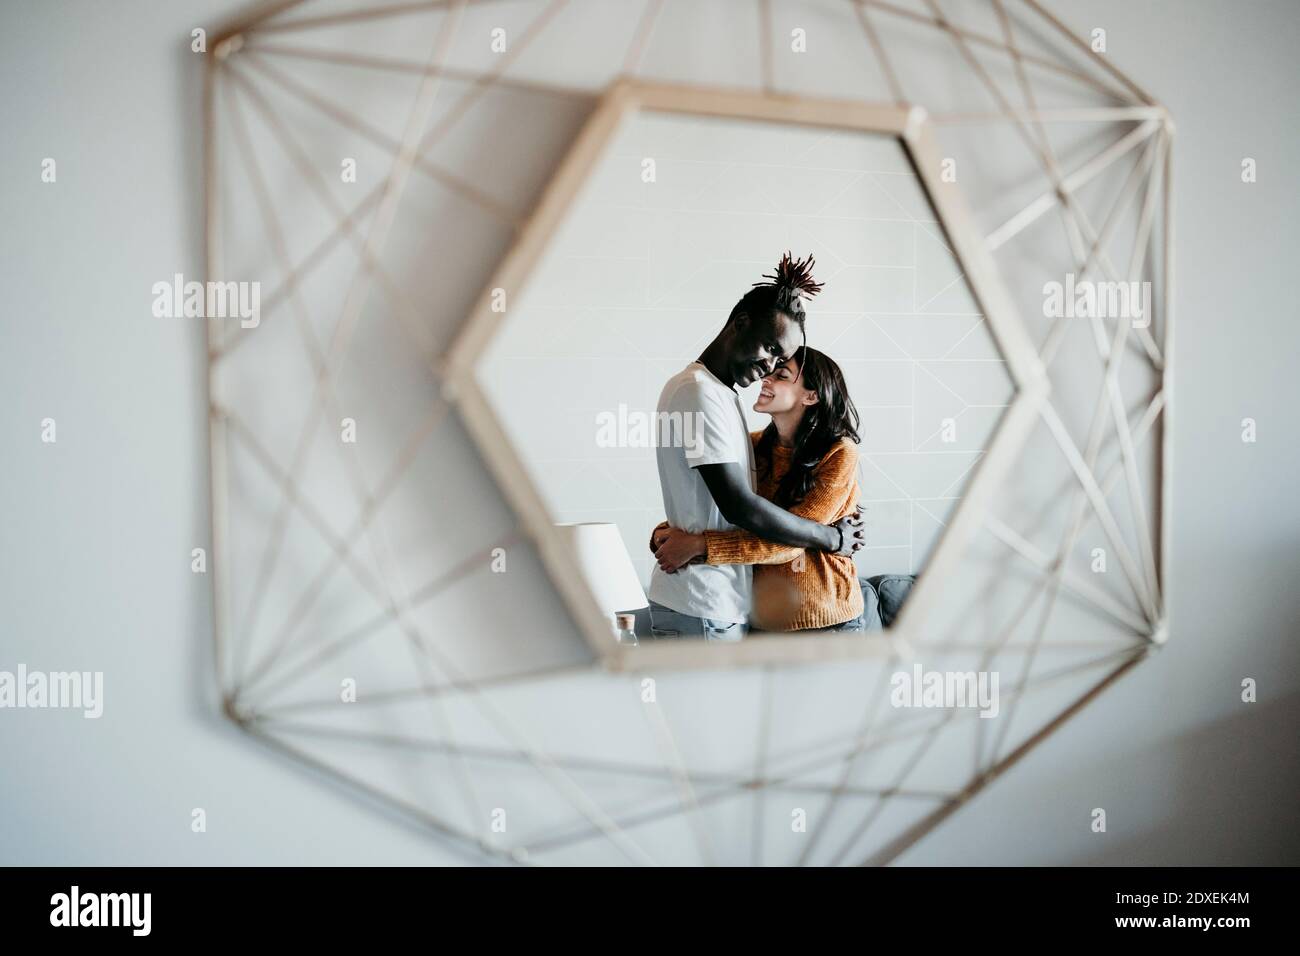 Reflection of multi-ethnic couple embracing on mirror at home Stock Photo